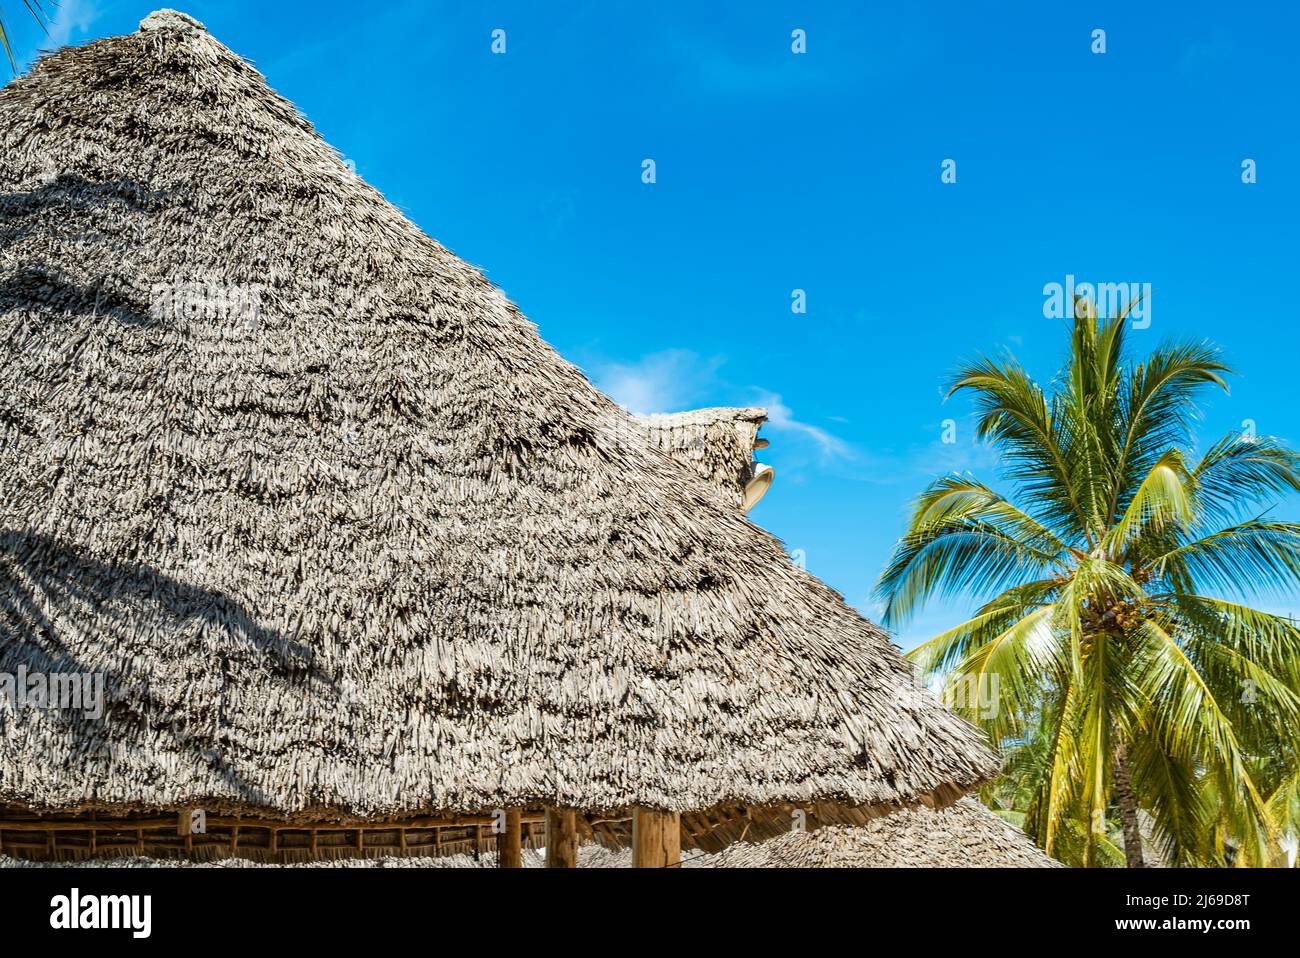 Roof of cafe made of wood and palm leaves. Nungwi, Zanzibar, Tanzania Stock Photo